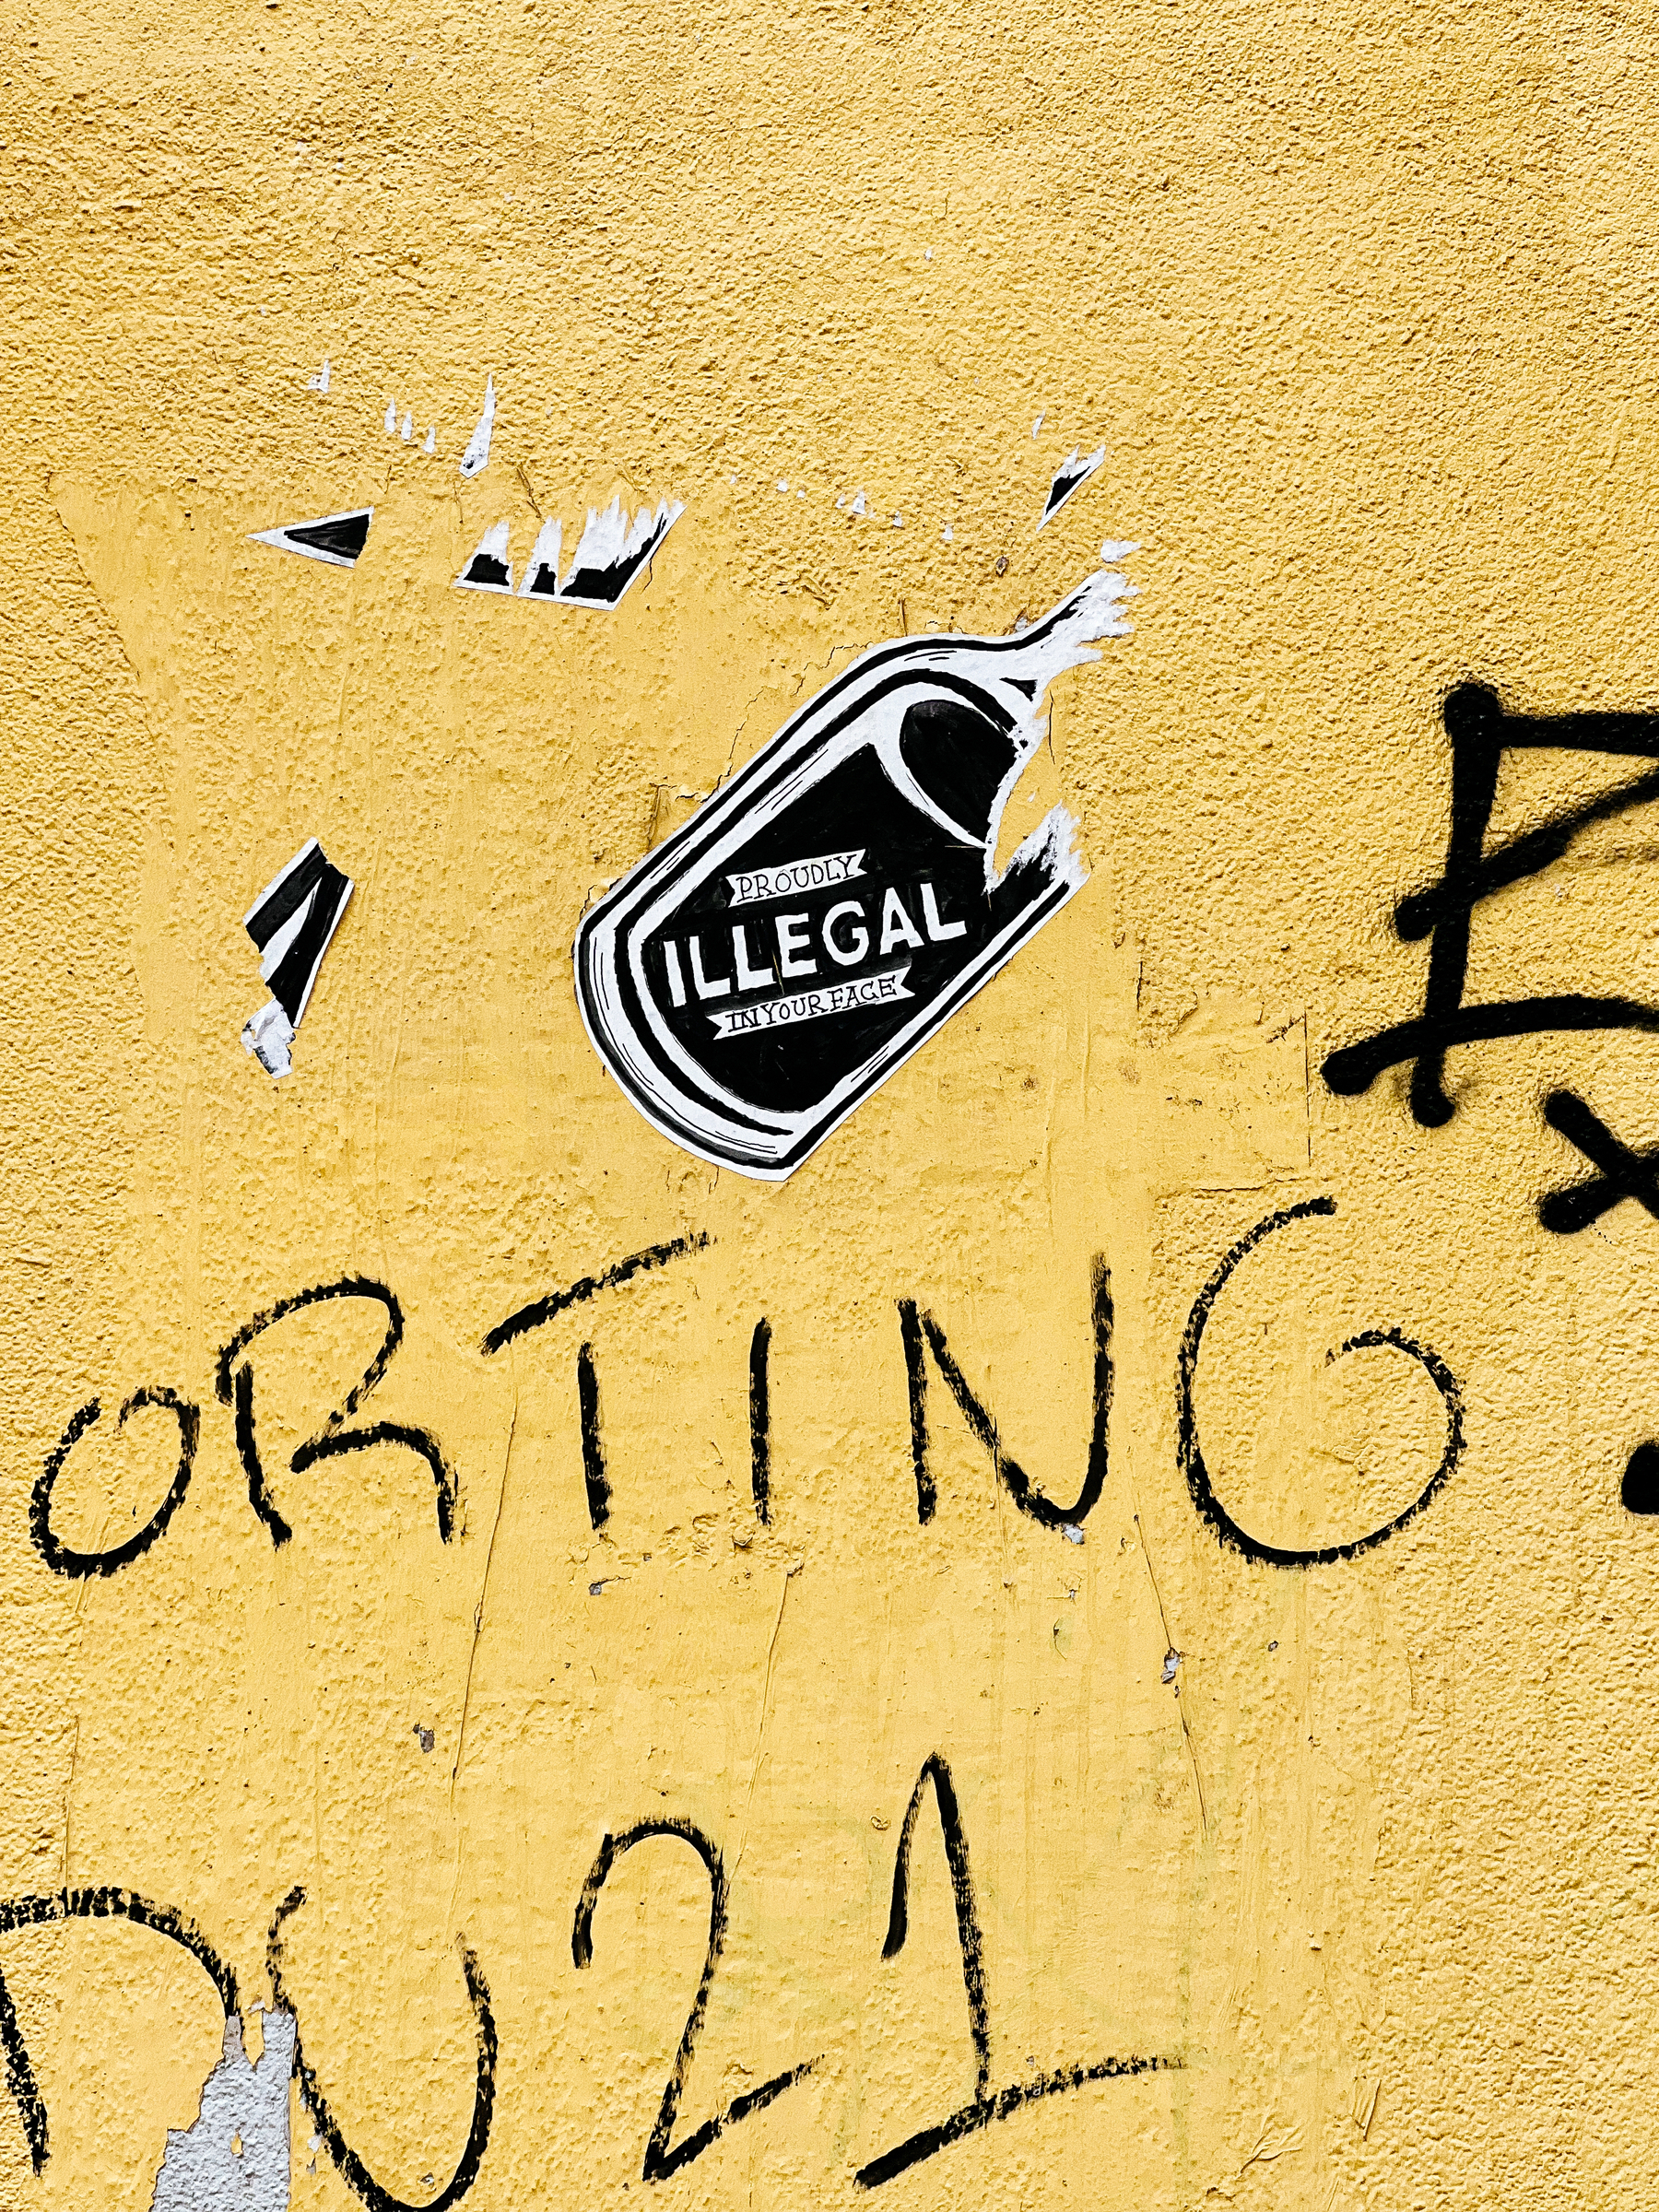 What’s left of a bottle sticker with the words “proudly illegal in your face”. Yellow wall. 